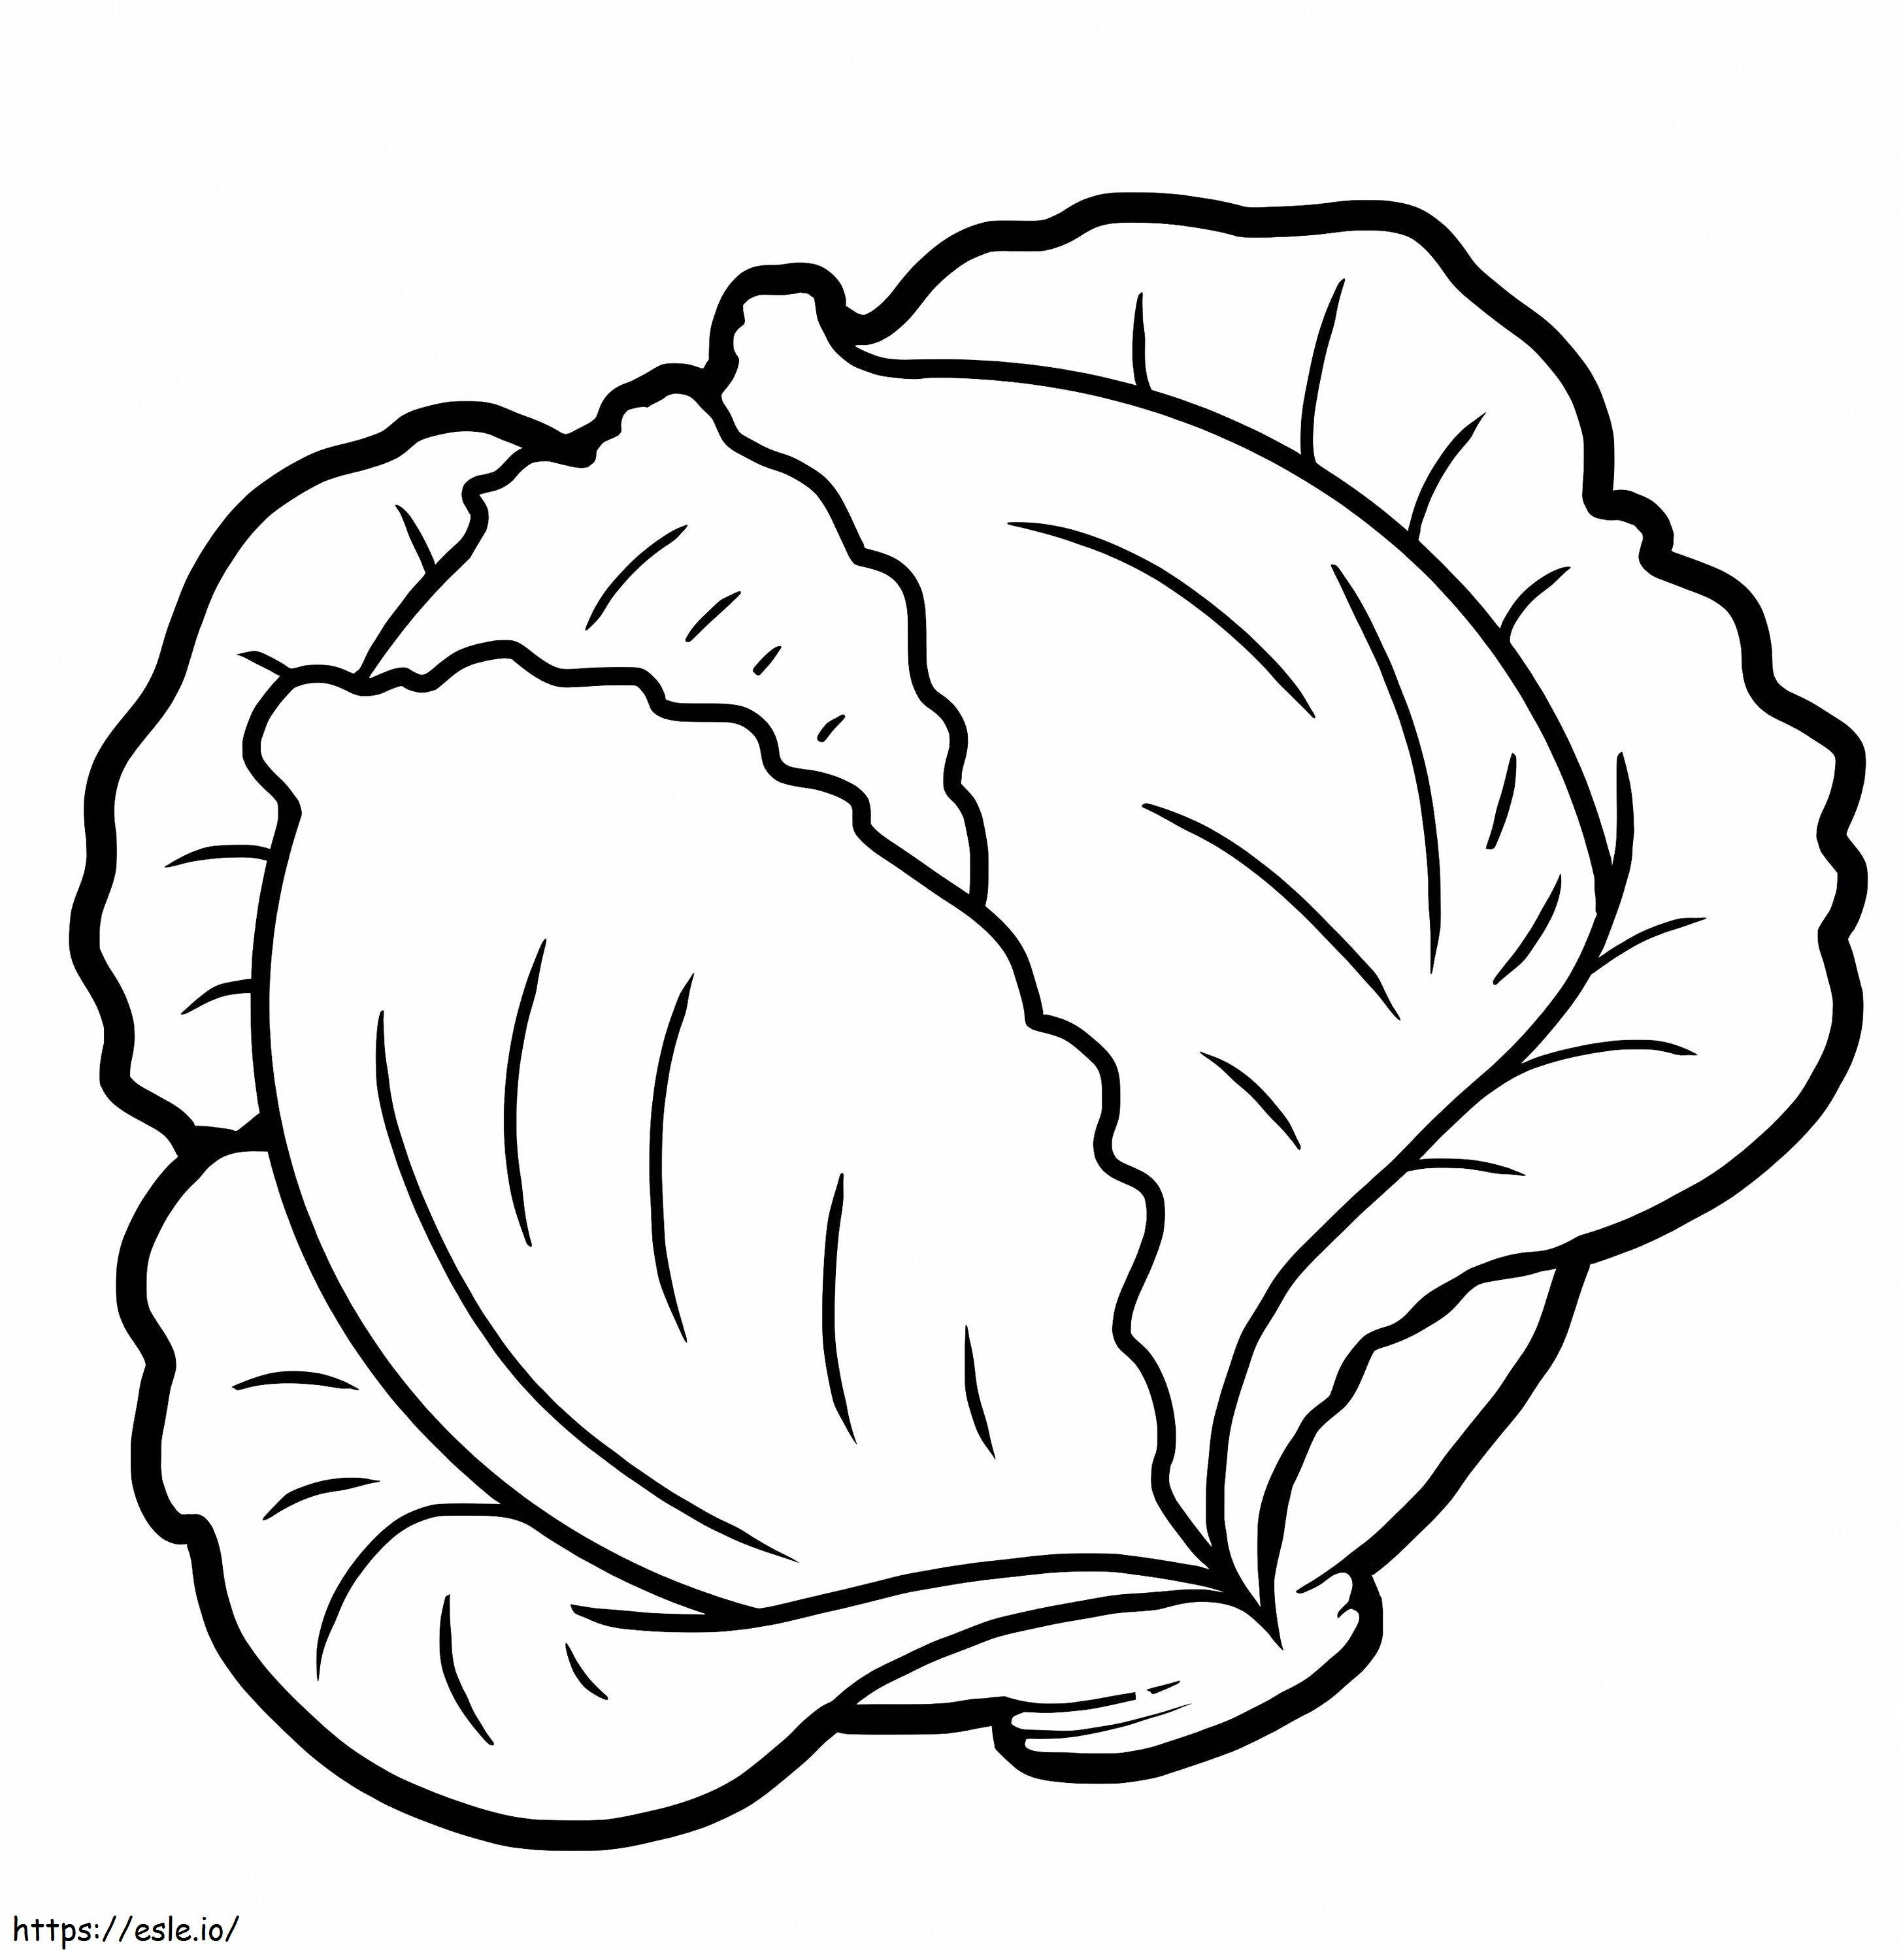 Green Cabbage 1 coloring page